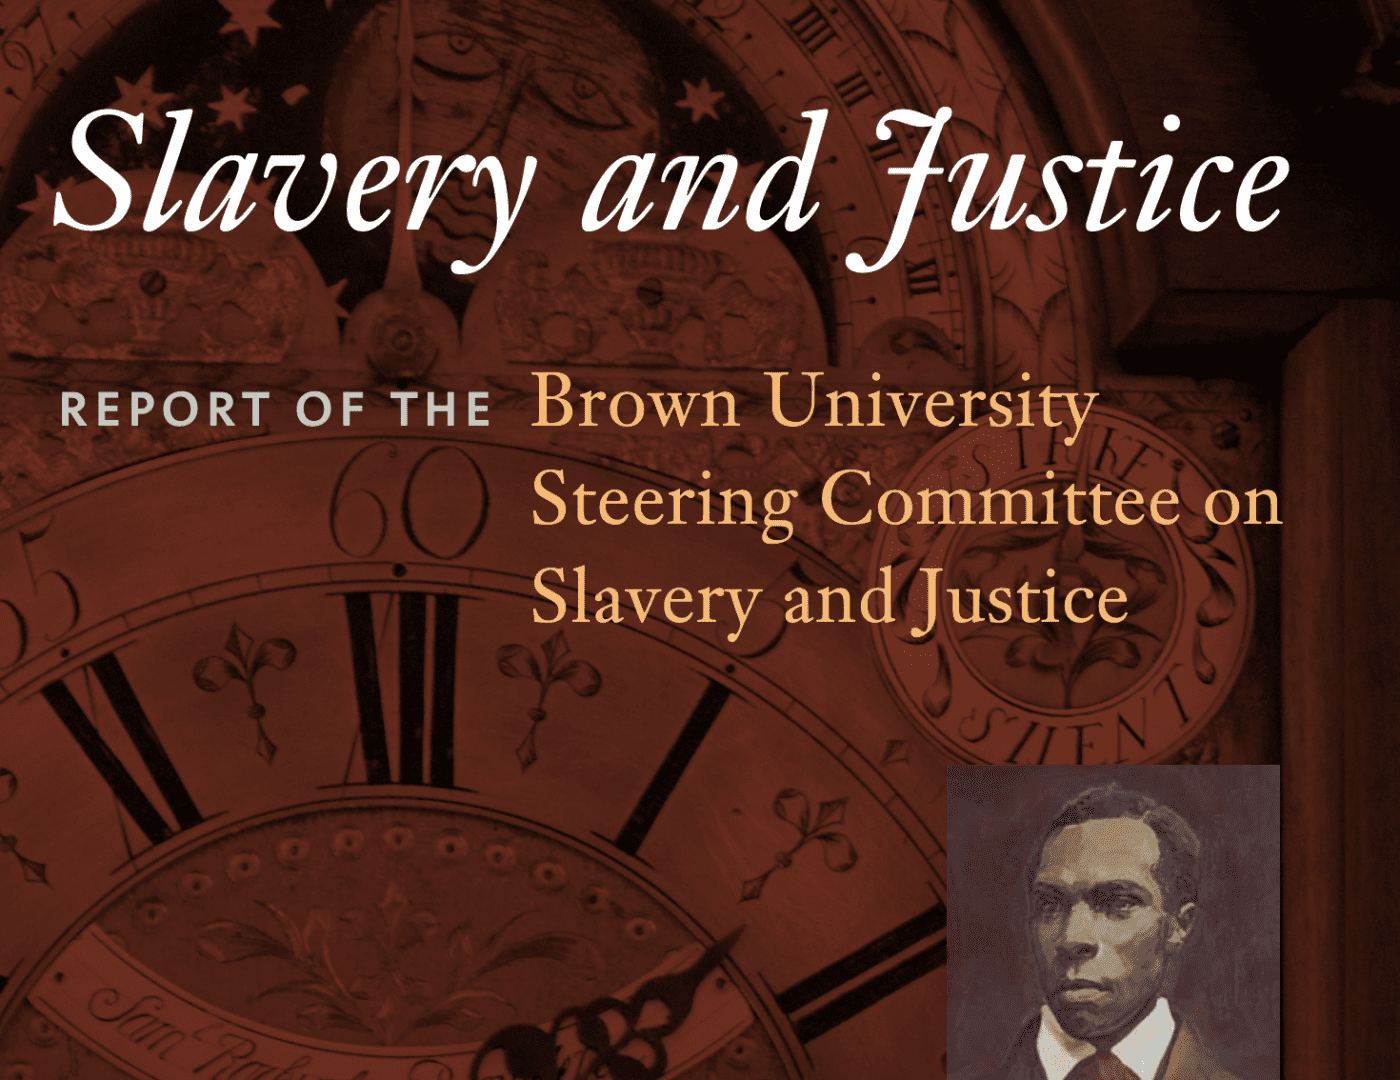 The cover of the report of the brown university committee on slavery and justice.